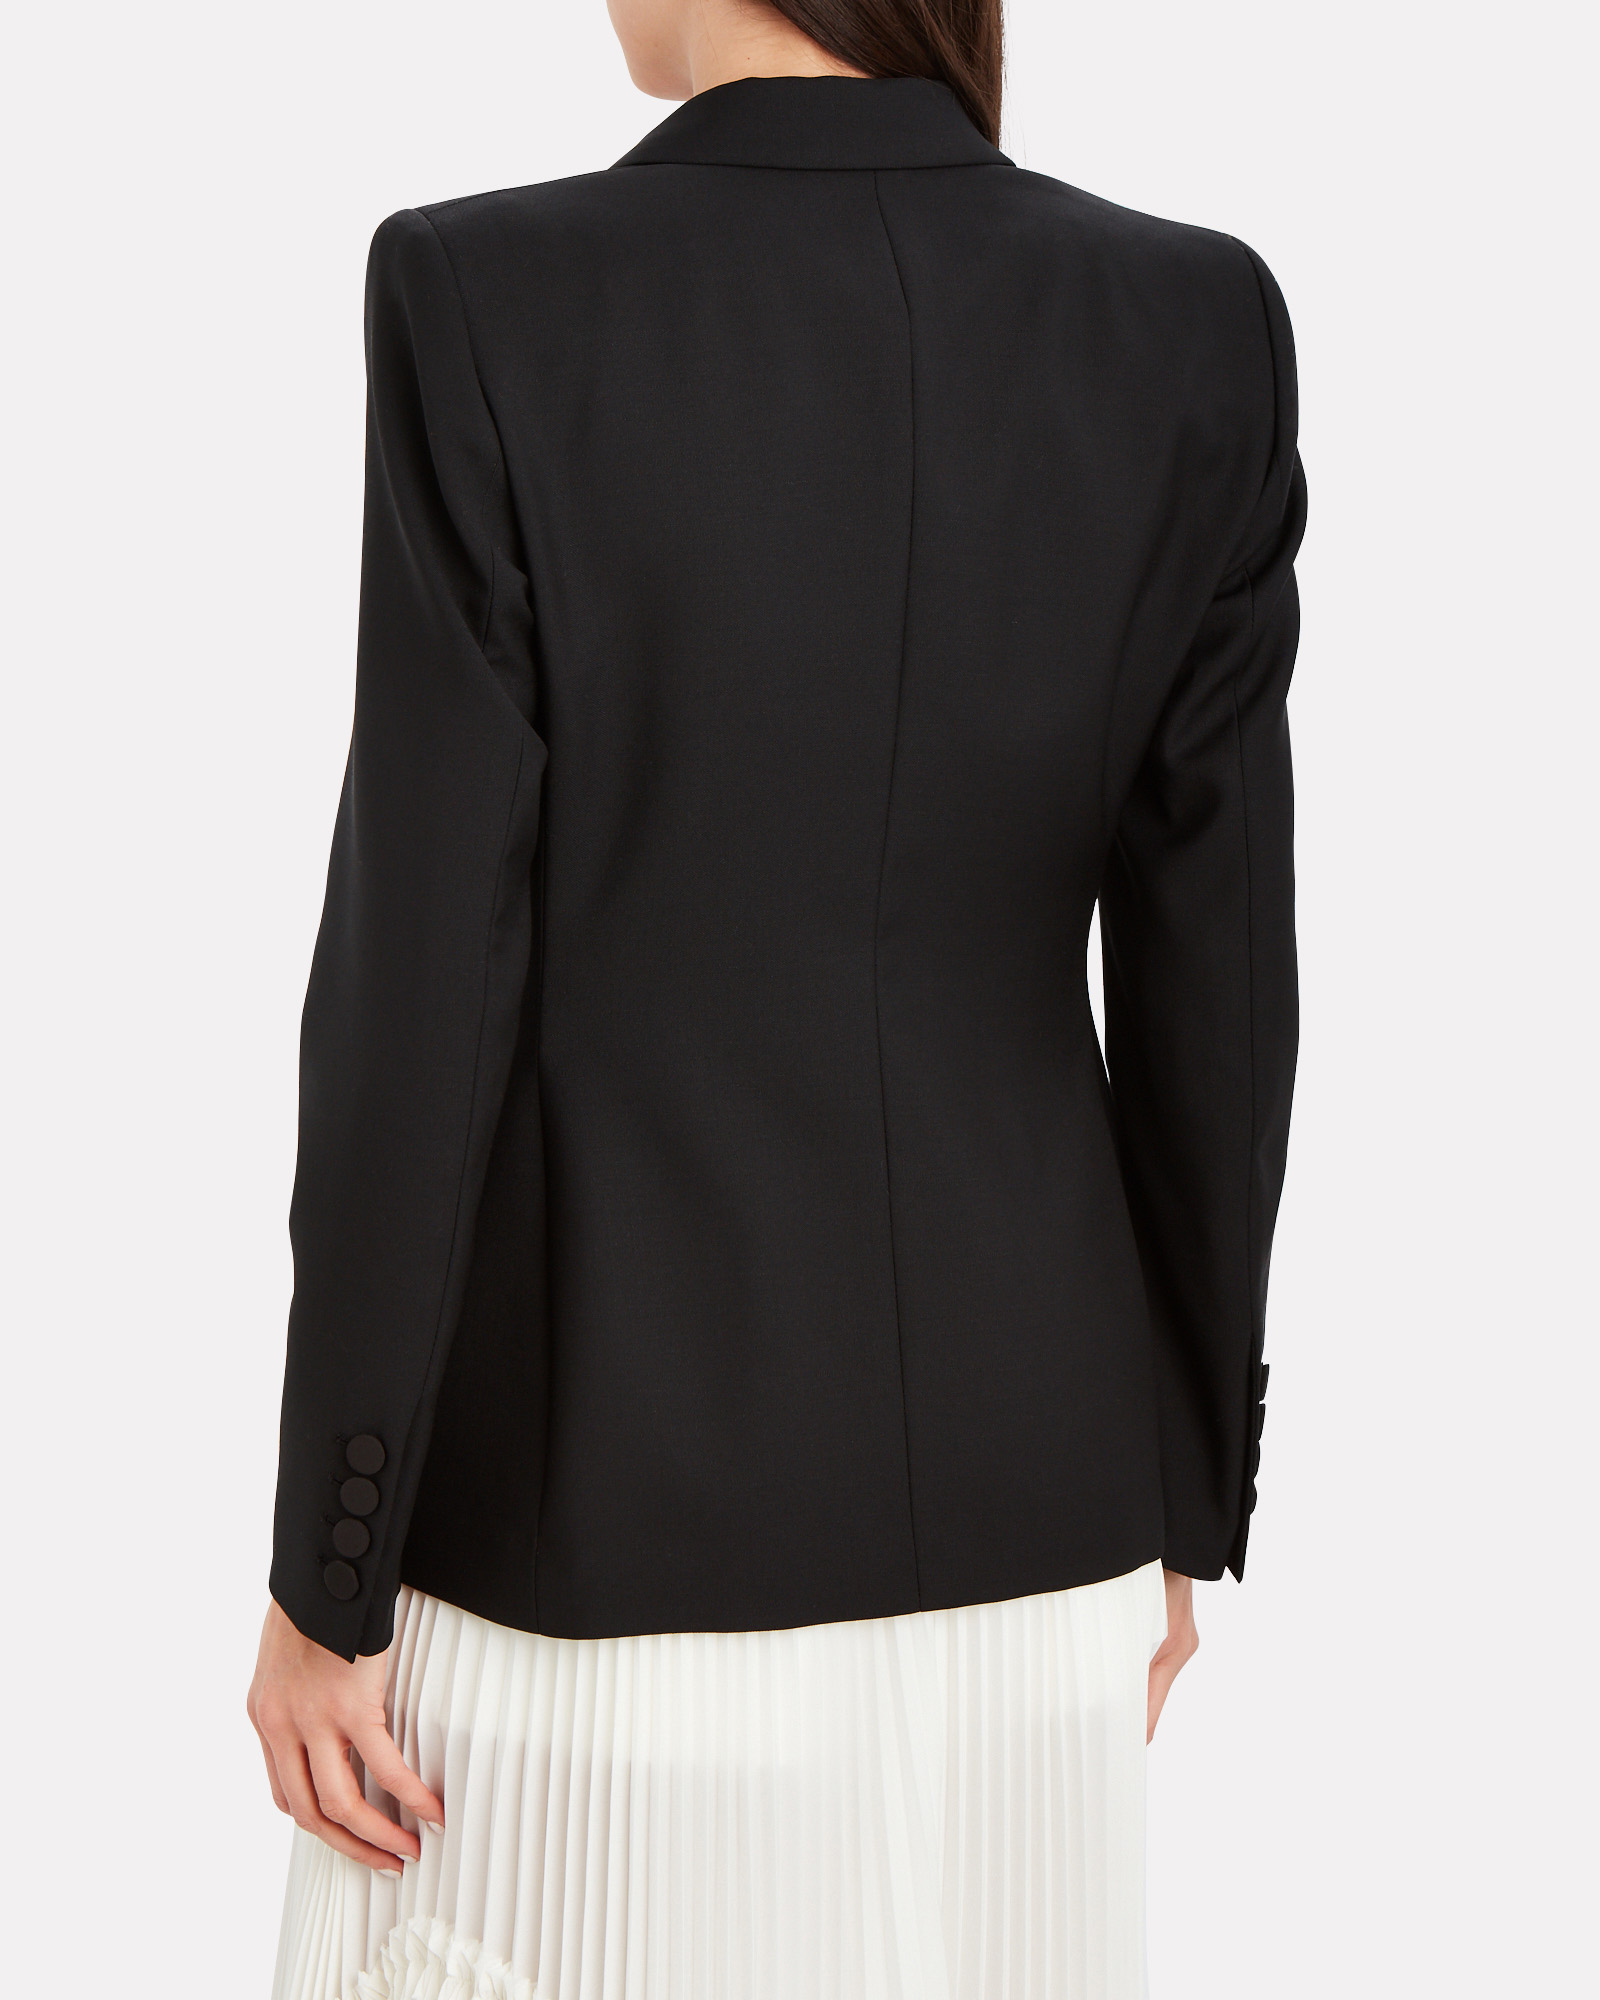 Blazé Milano | Charmer Fitted Double-Breasted Blazer | INTERMIX®